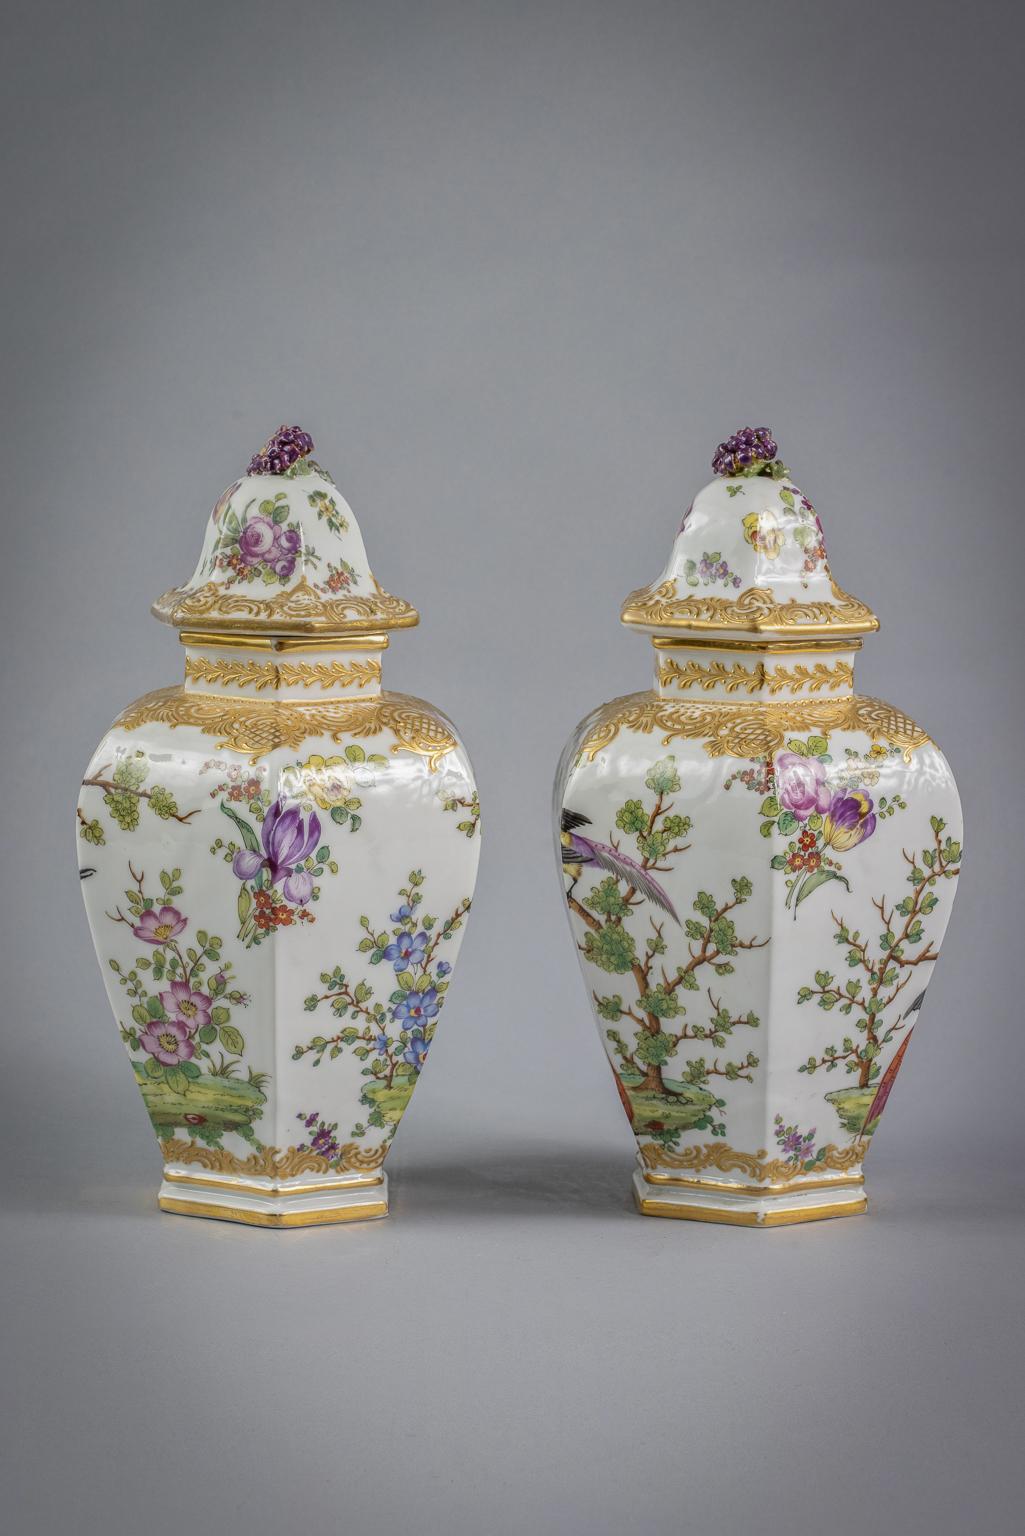 Pair of English Porcelain Covered Hexagonal Vases, circa 1840 In Good Condition For Sale In New York, NY